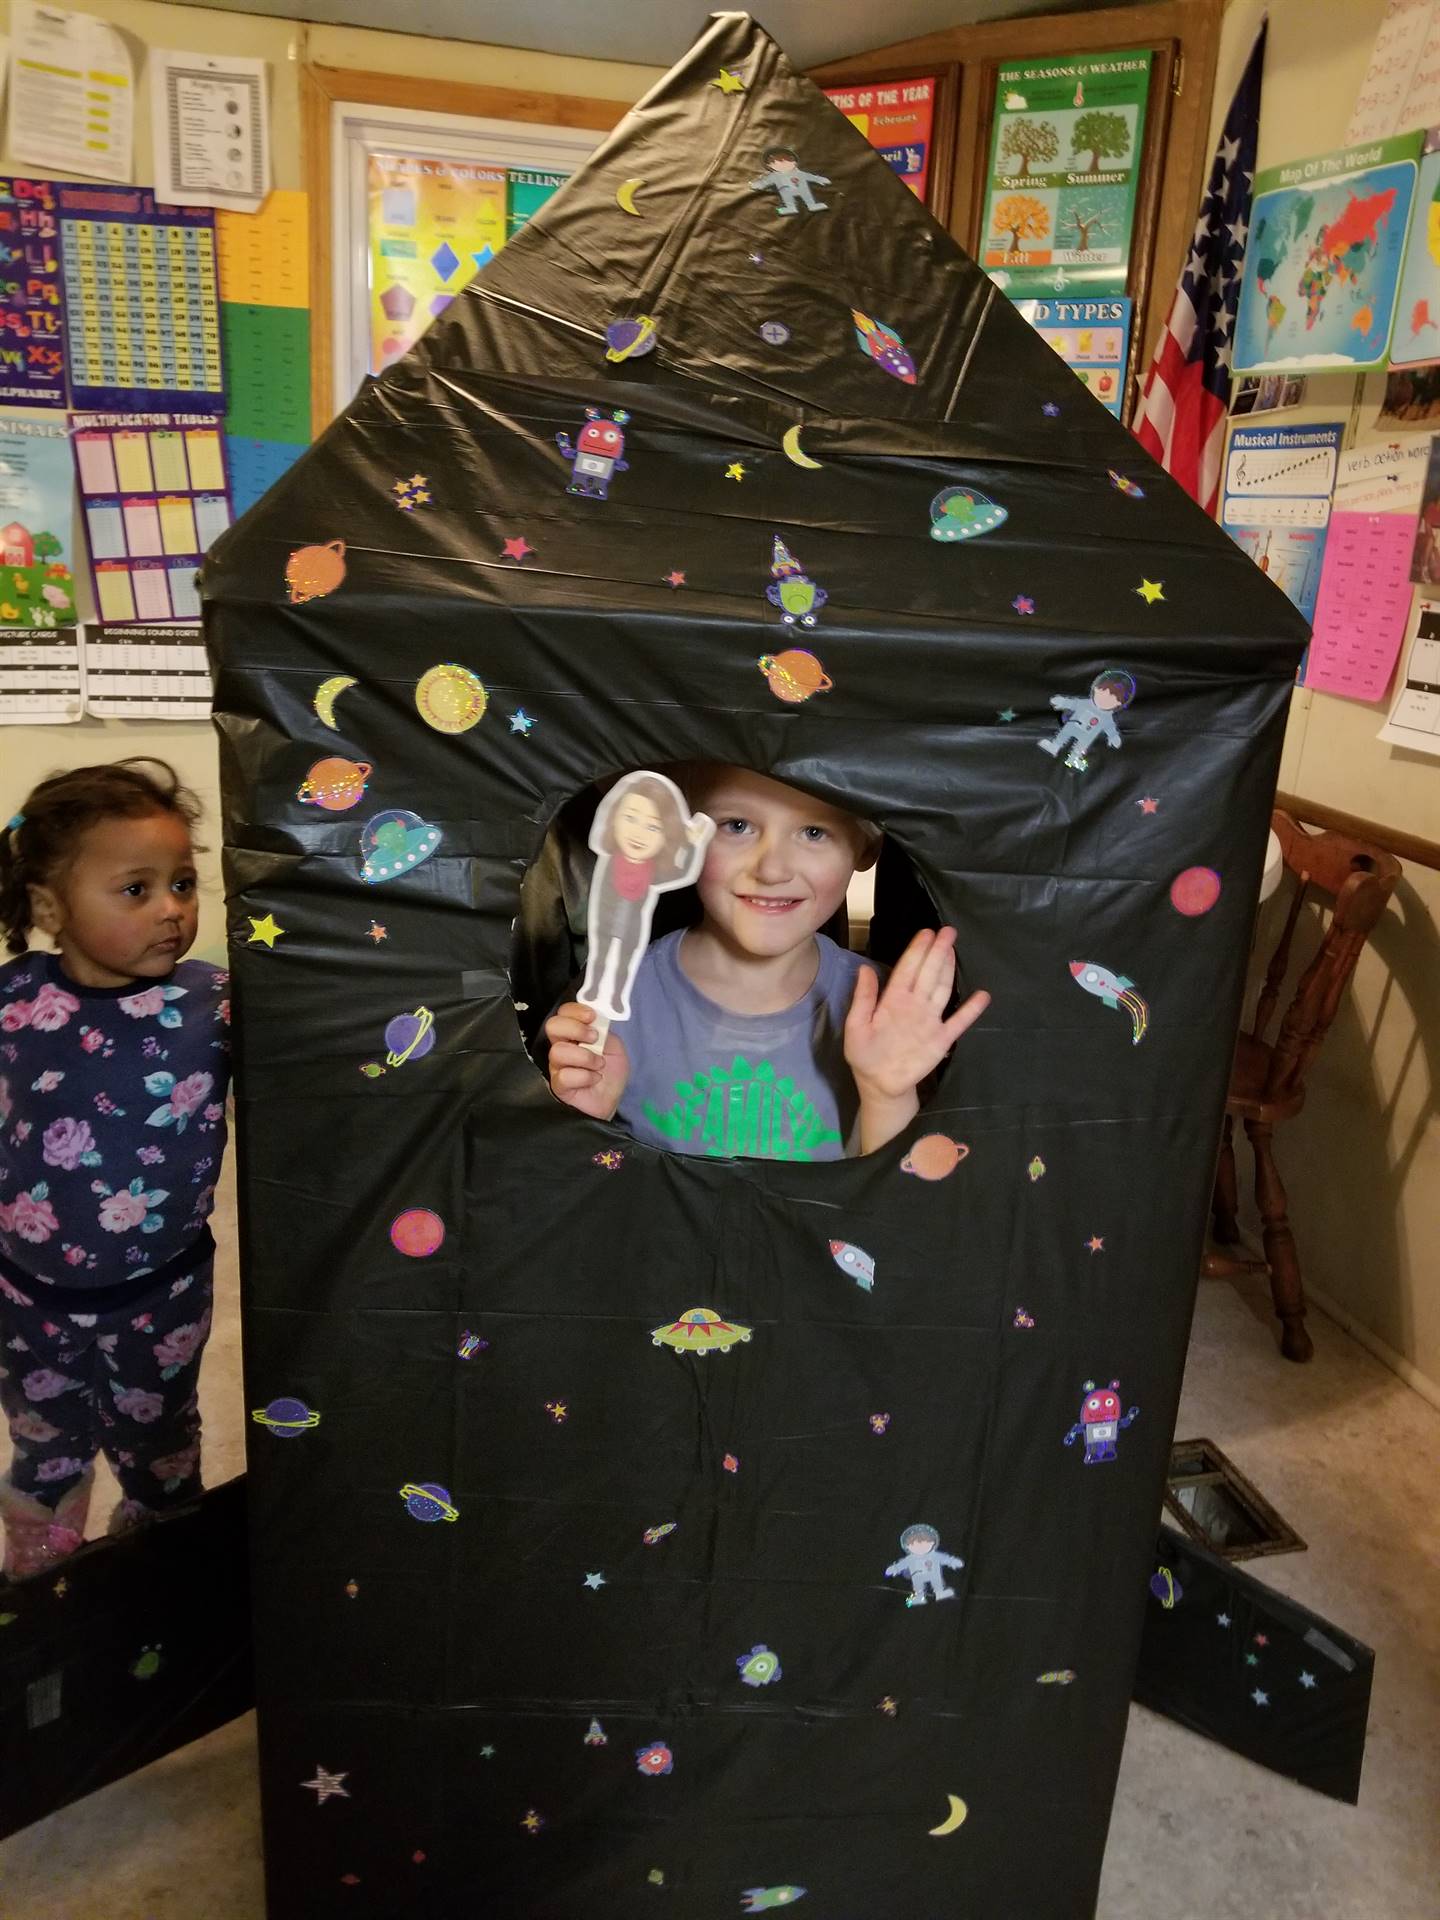 Student in tent with paper doll teacher.